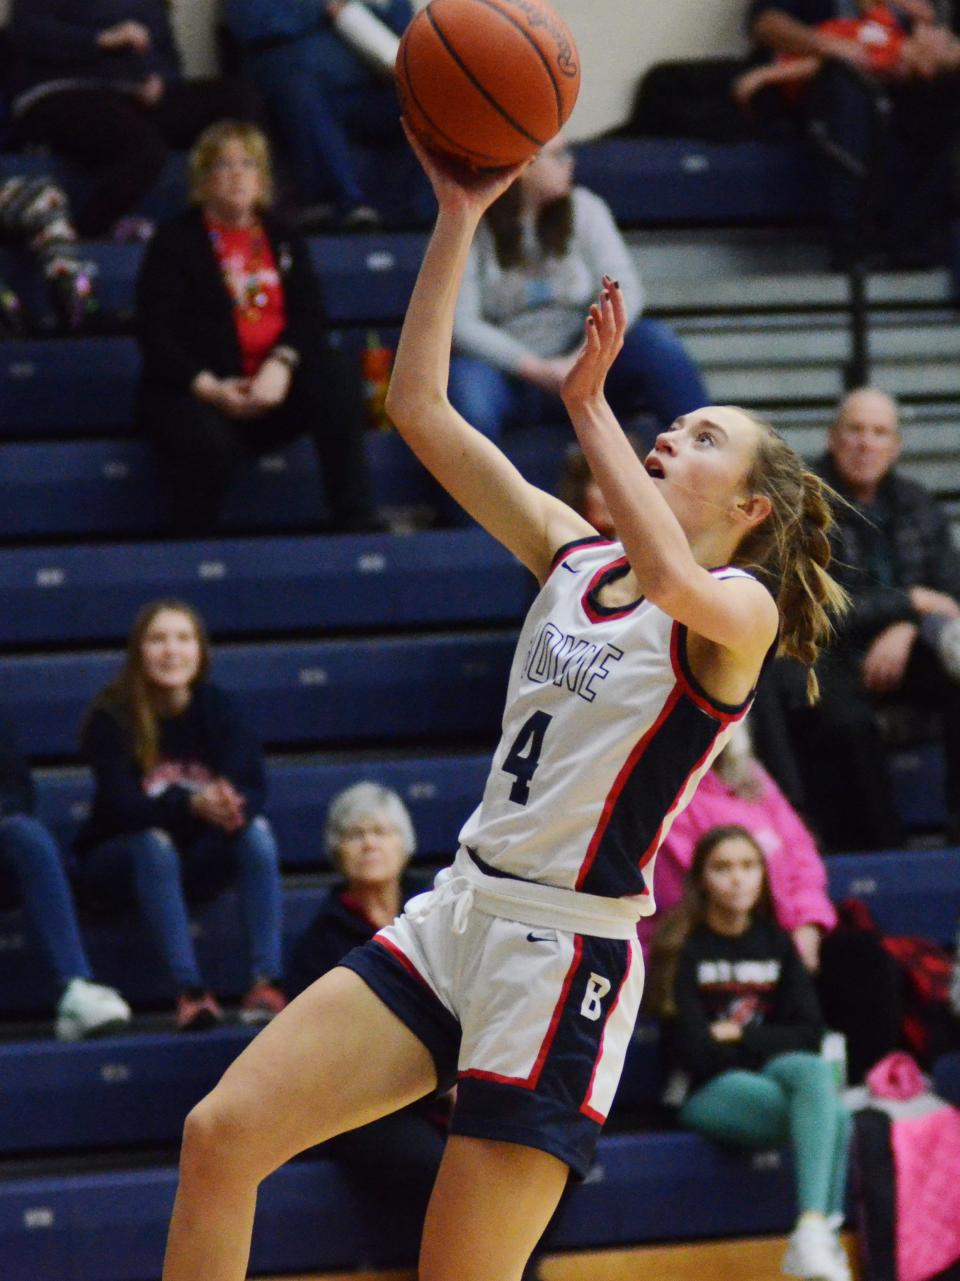 Boyne City's Ava Maginity finishes off a steal with a layup at the other end.